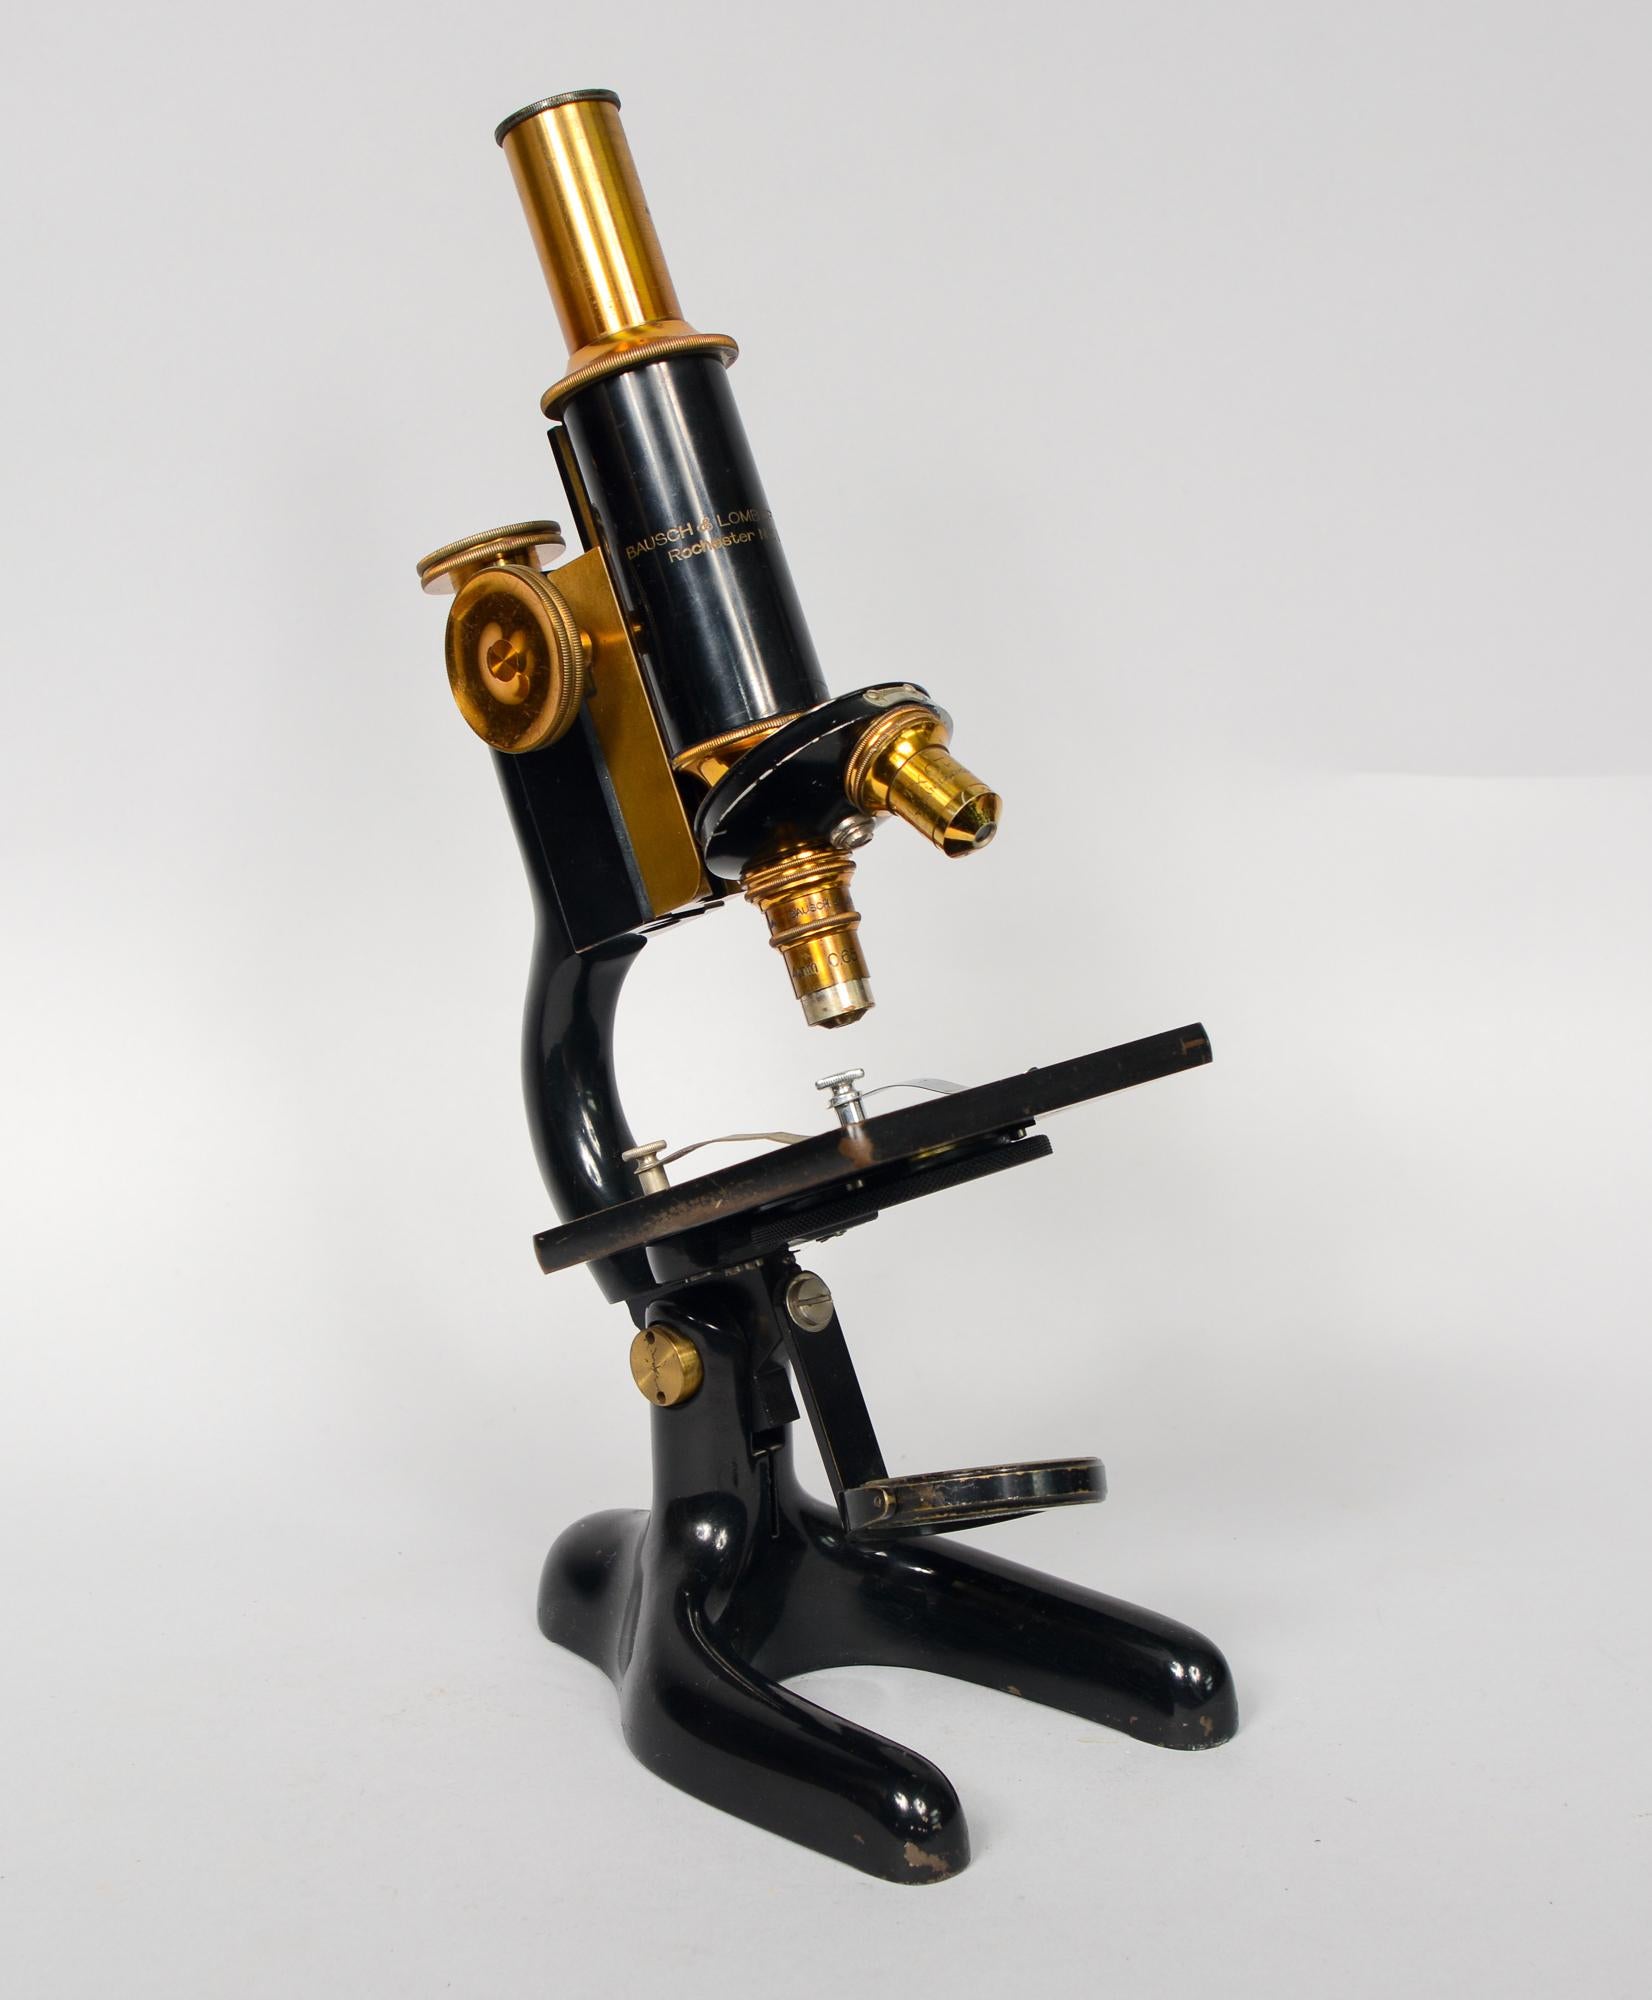 Brass Bausch and Lomb microscope. This microscope has two objectives. The box this is in may not be the correct one. The dimensions listed are for the box. The microscope is 4.25 inches deep, 6.25 inches wide and 13 inches tall. This is from an